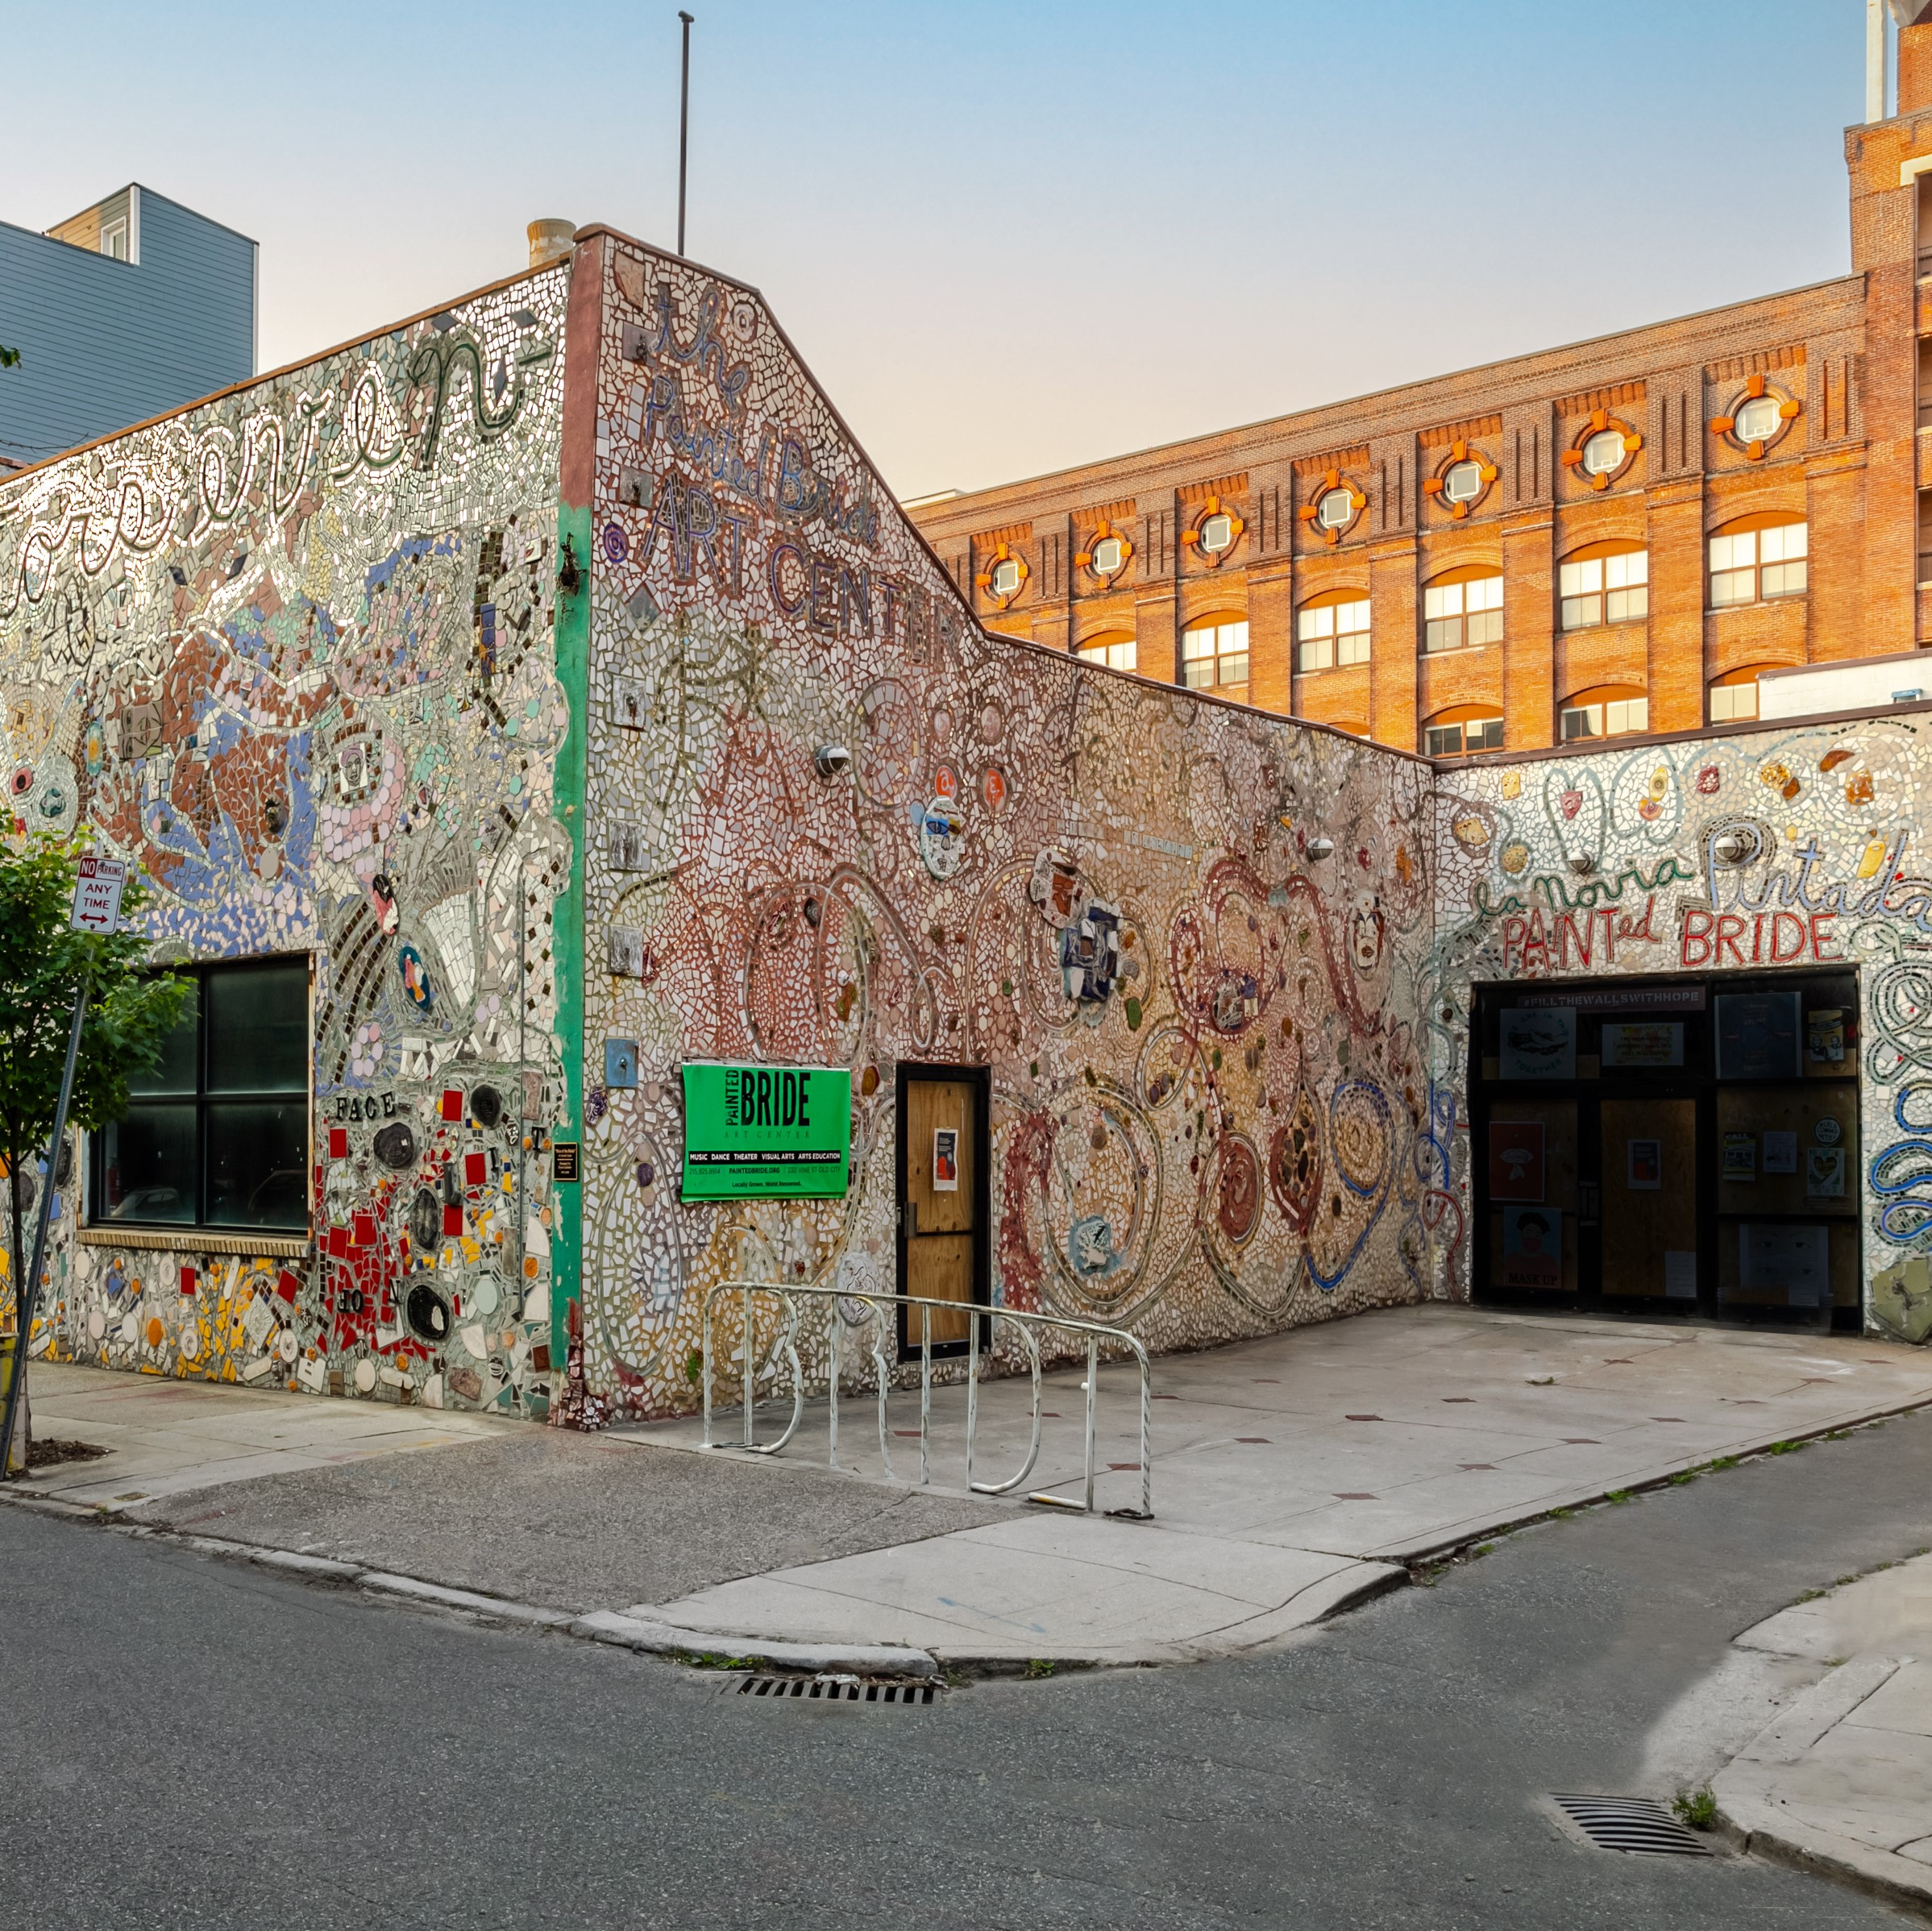 "Mural City" - When art clashes with development